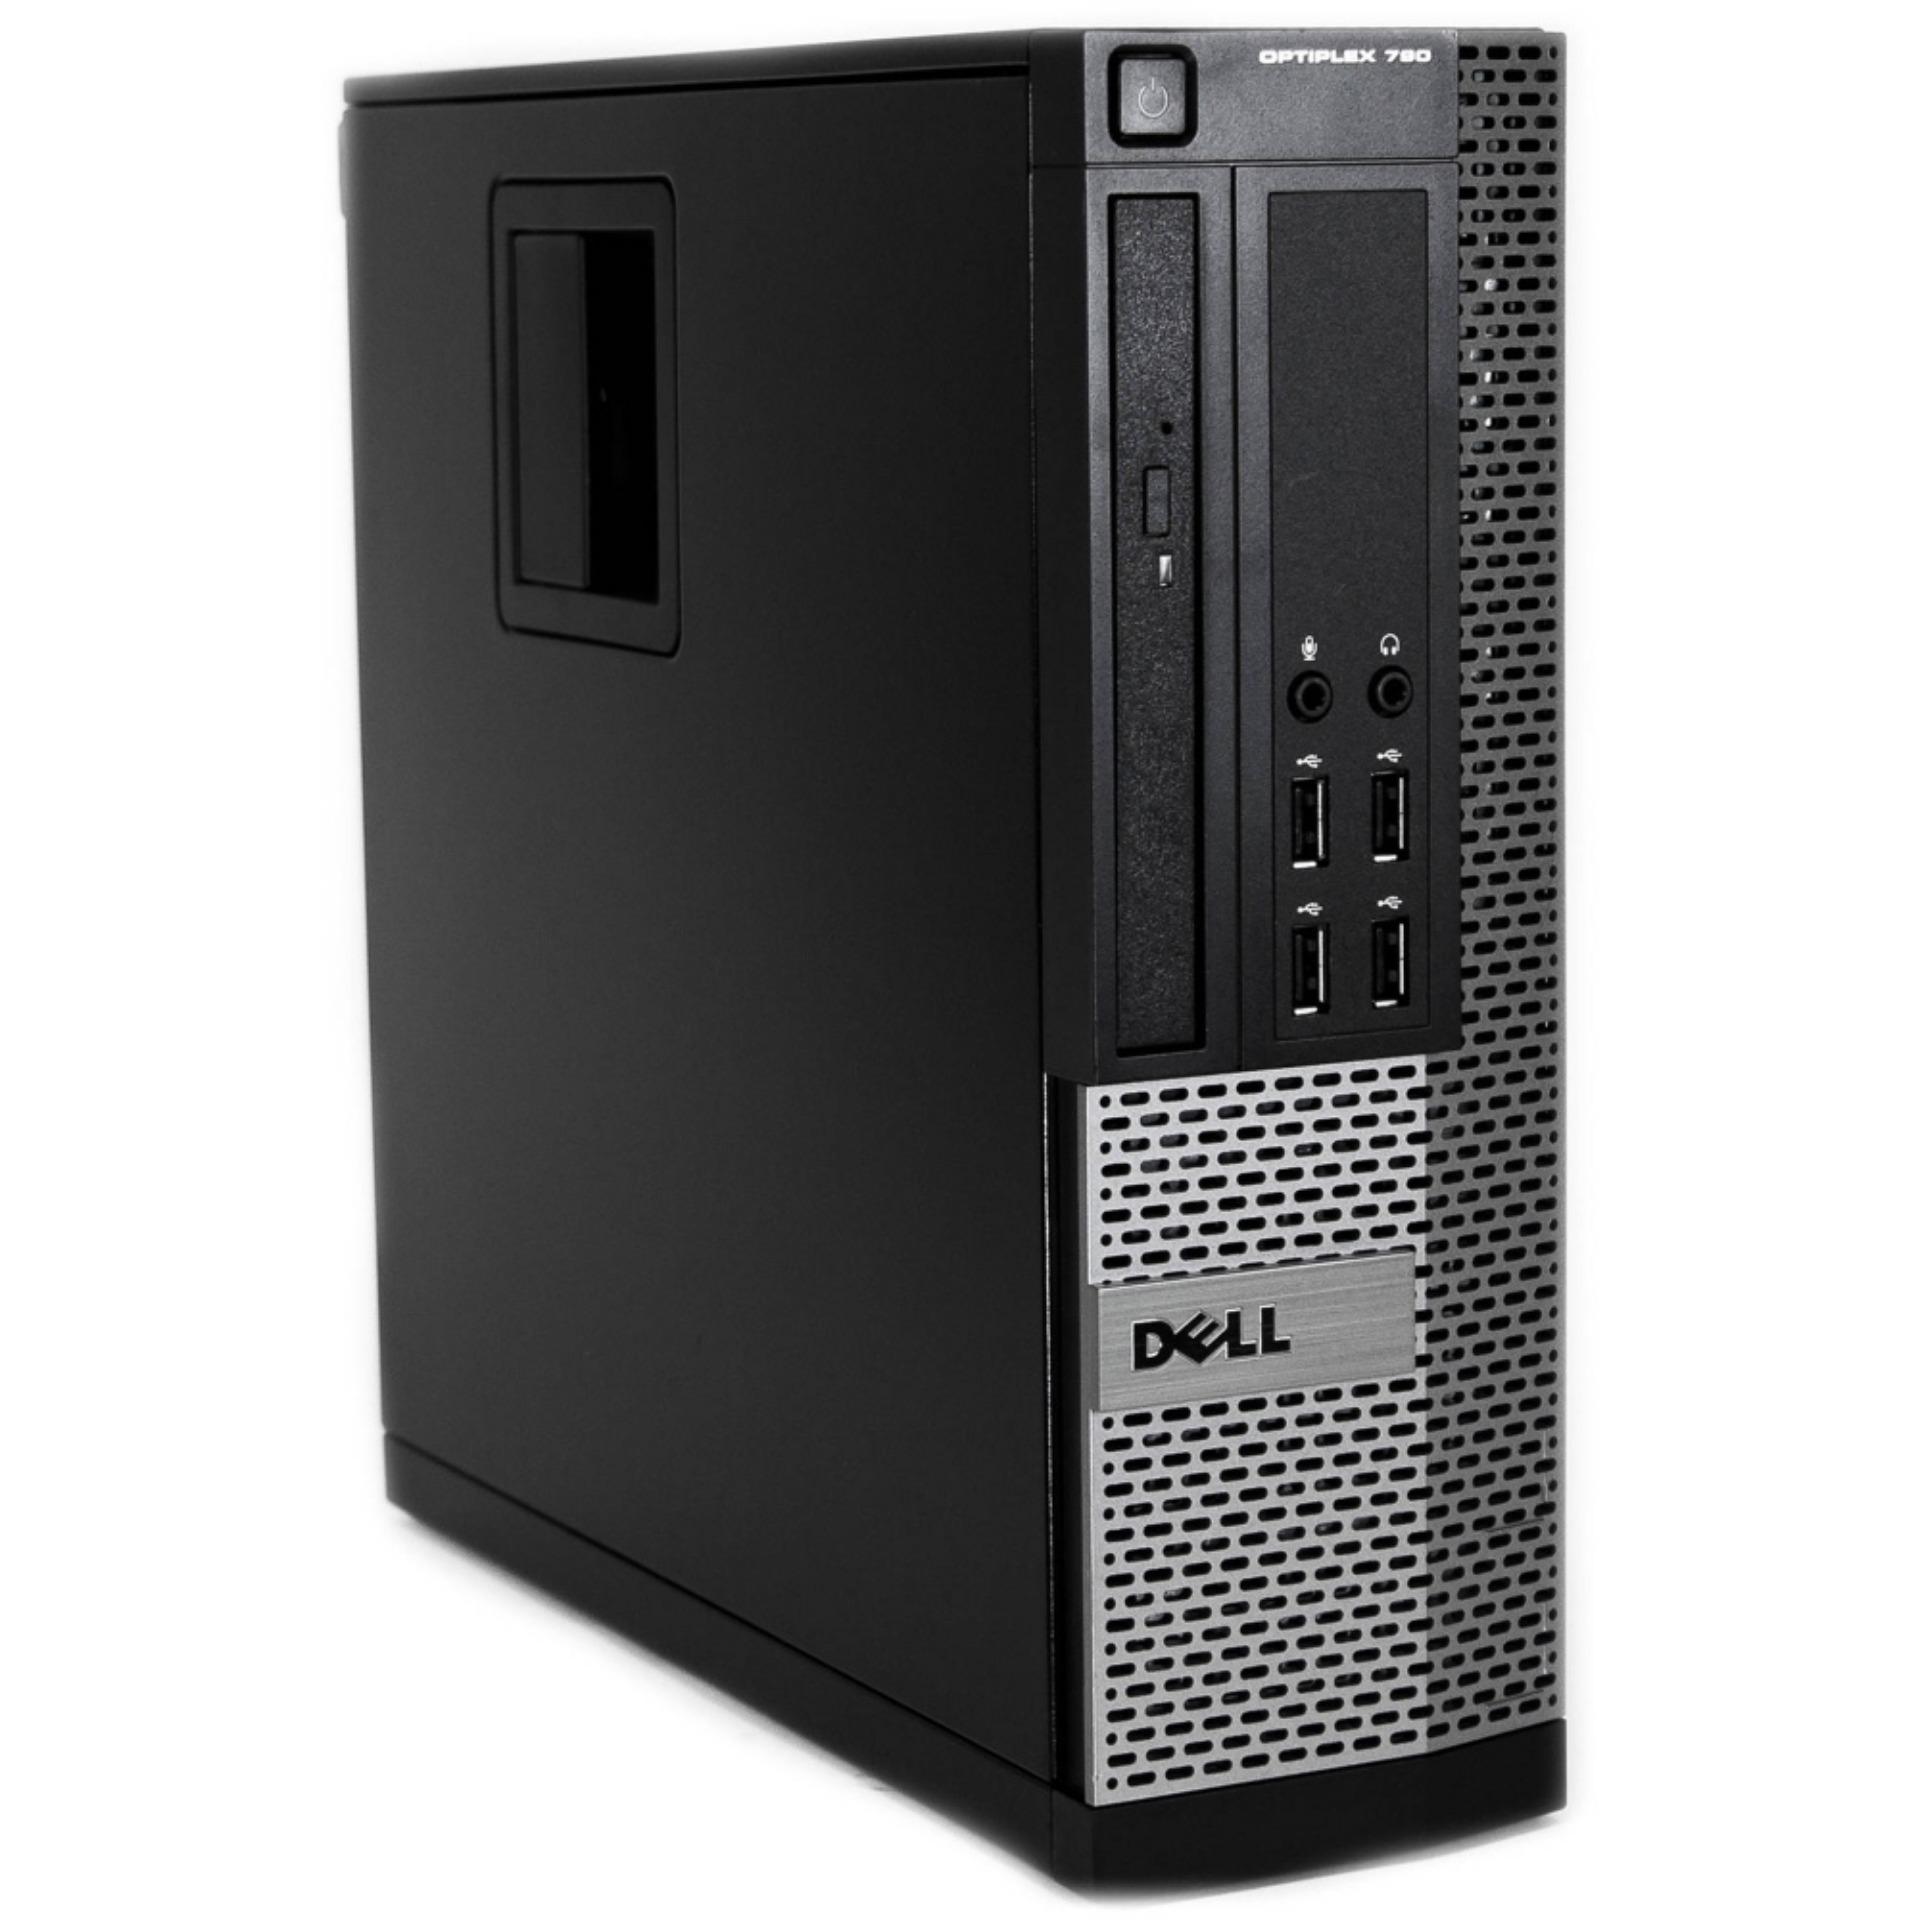 Dell OptiPlex 3020 Refurished PC With 6 Months Warranty